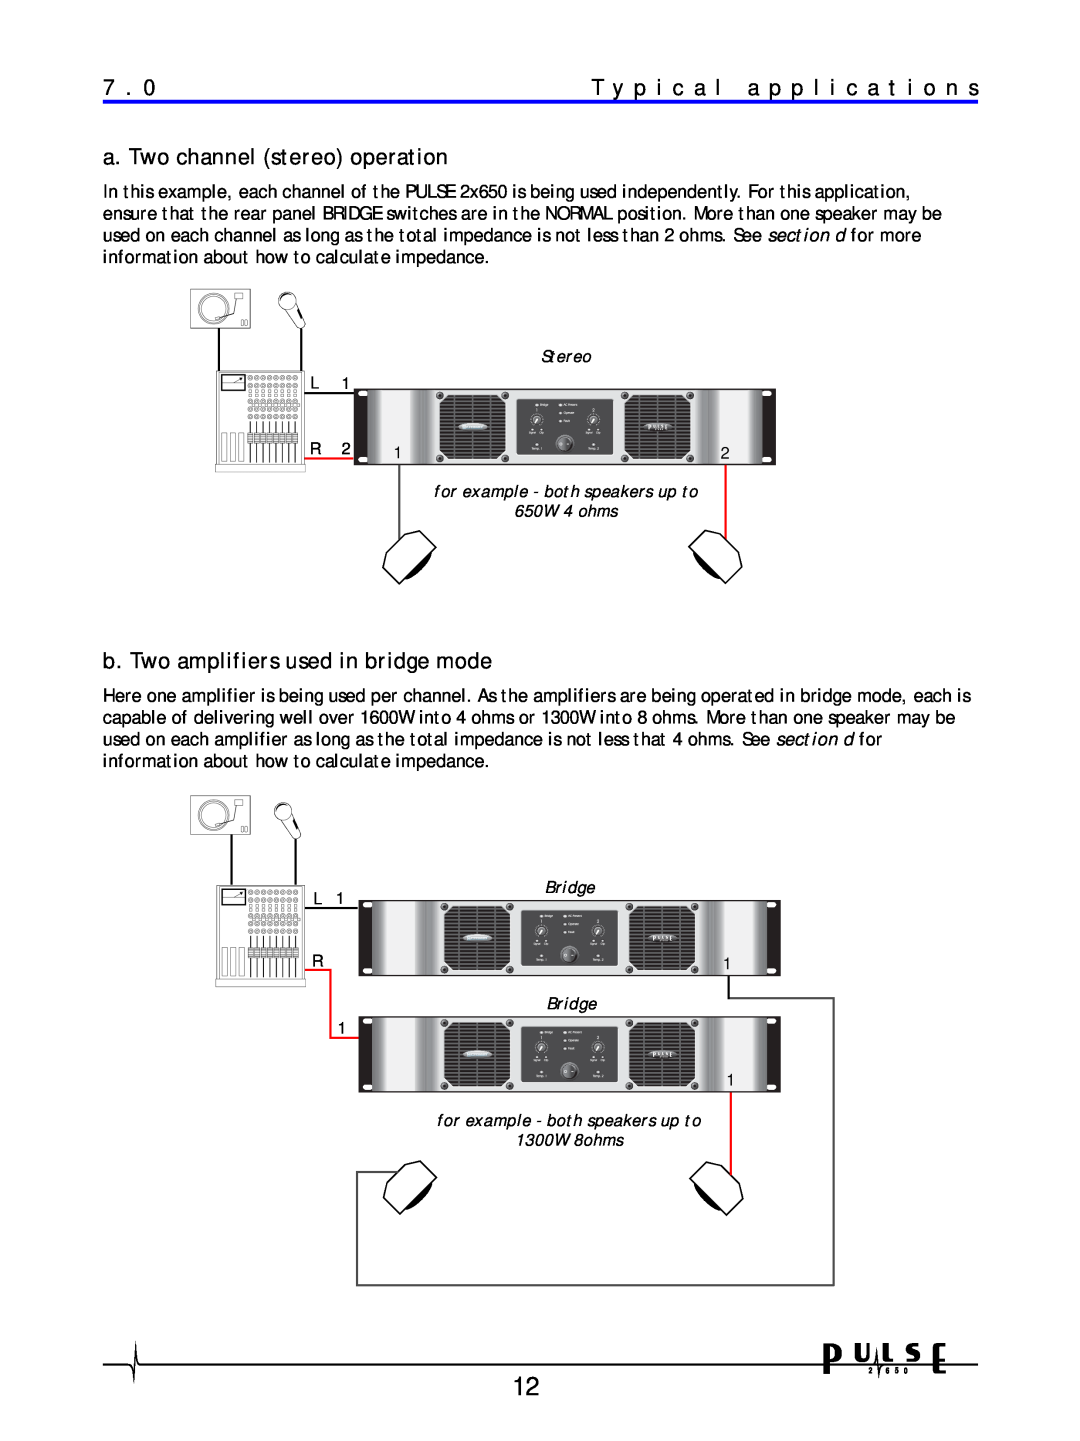 Crown Audio 2650 user manual T y p i c a l a p p l i c a t i o n s, a. Two channel stereo operation, Stereo, Bridge 